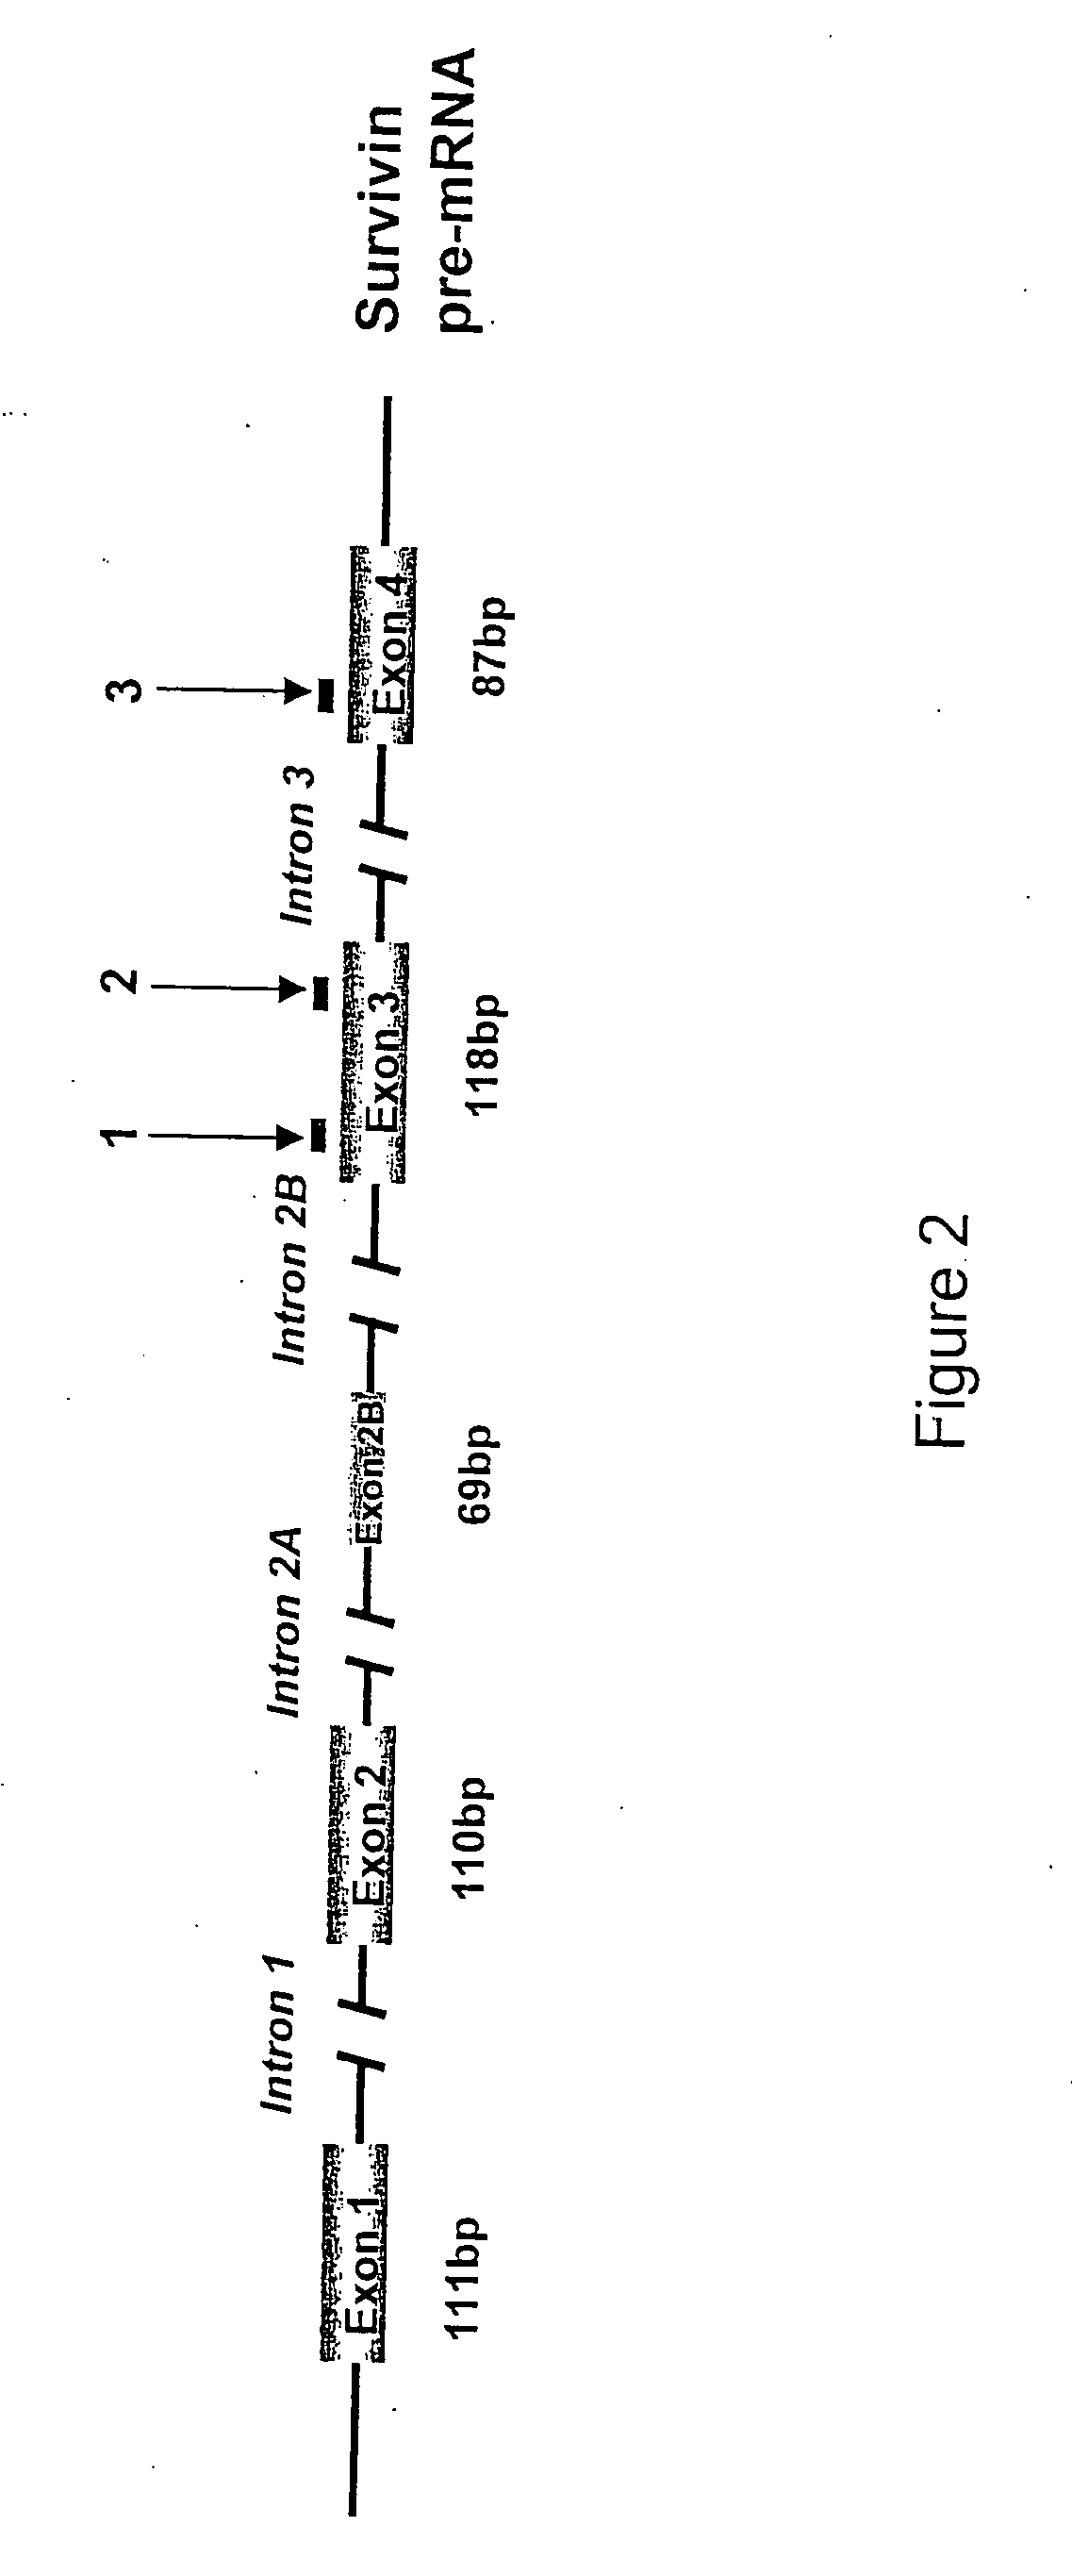 Survivin-directed RNA interference-compositions and methods